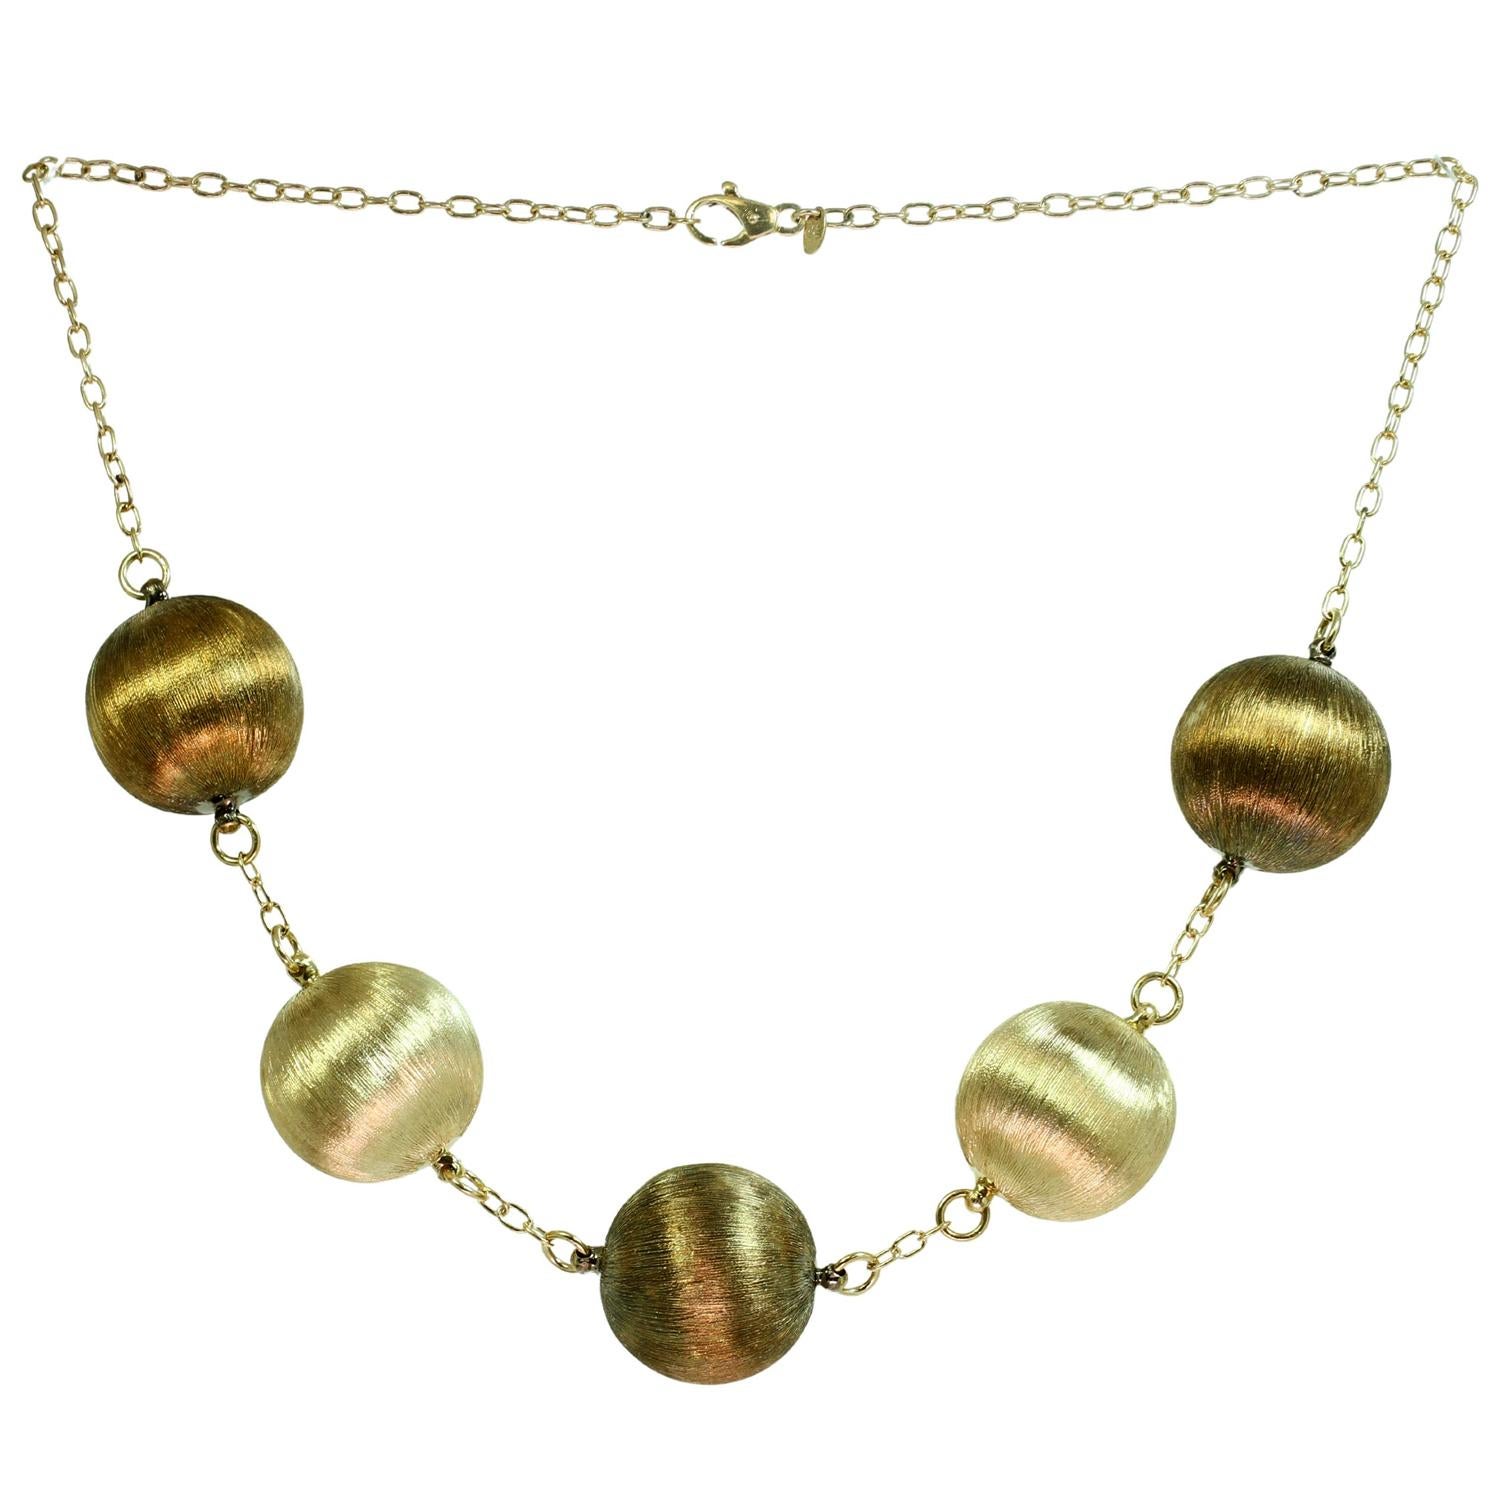 This gorgeous and chic Italian pair of necklaces features a collar chain complemented with round balls and a long chain complemented with oval elements, hand-crafted in 18k brushed rose green and yellow gold. Made in Italy circa 1990s. Measurements: